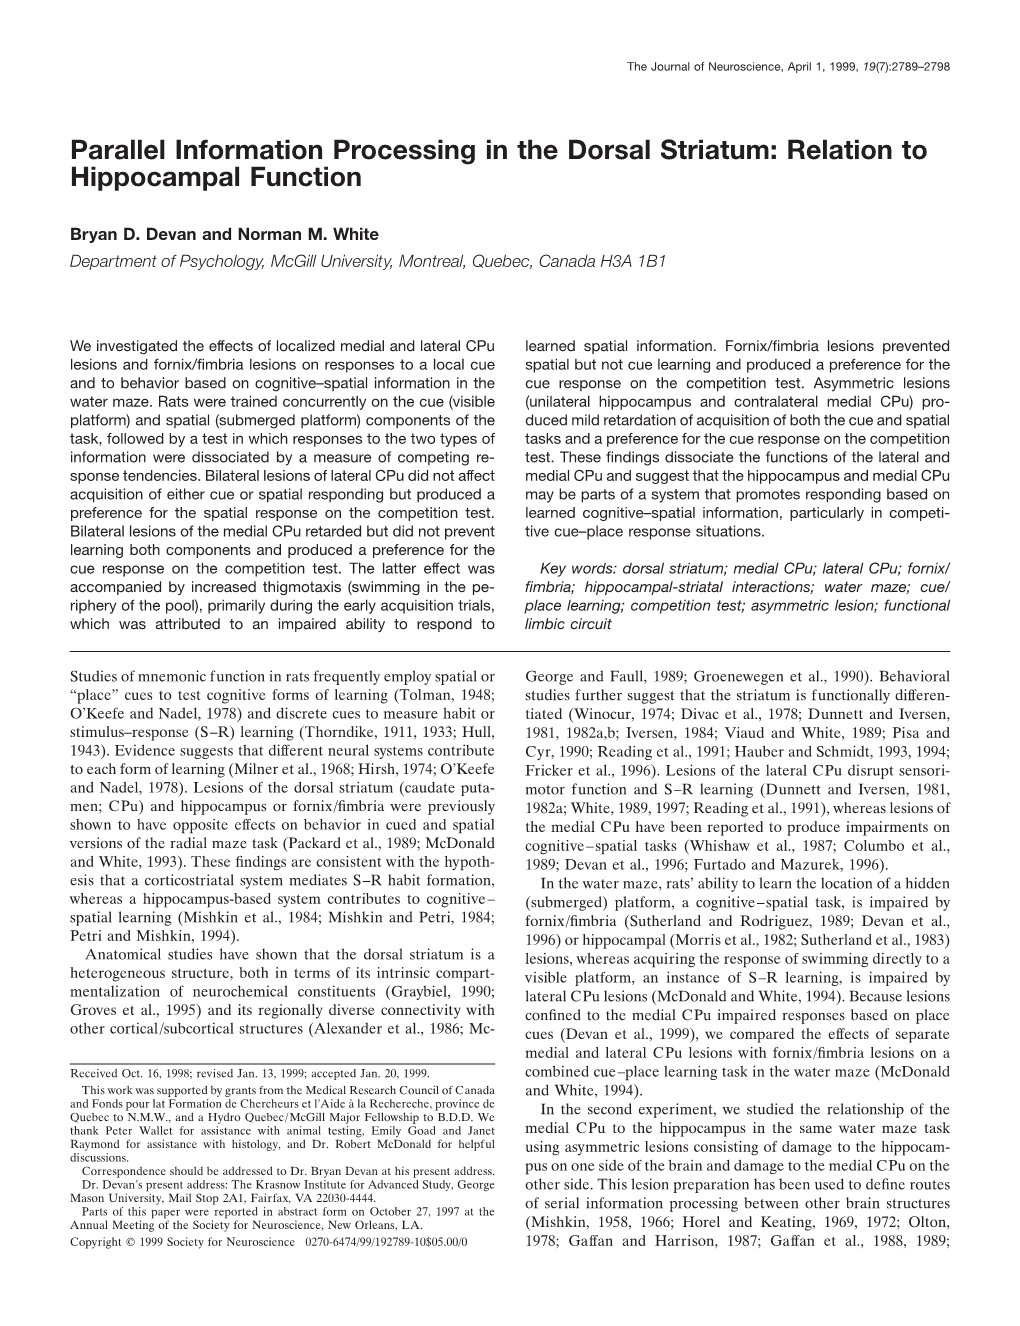 Parallel Information Processing in the Dorsal Striatum: Relation to Hippocampal Function